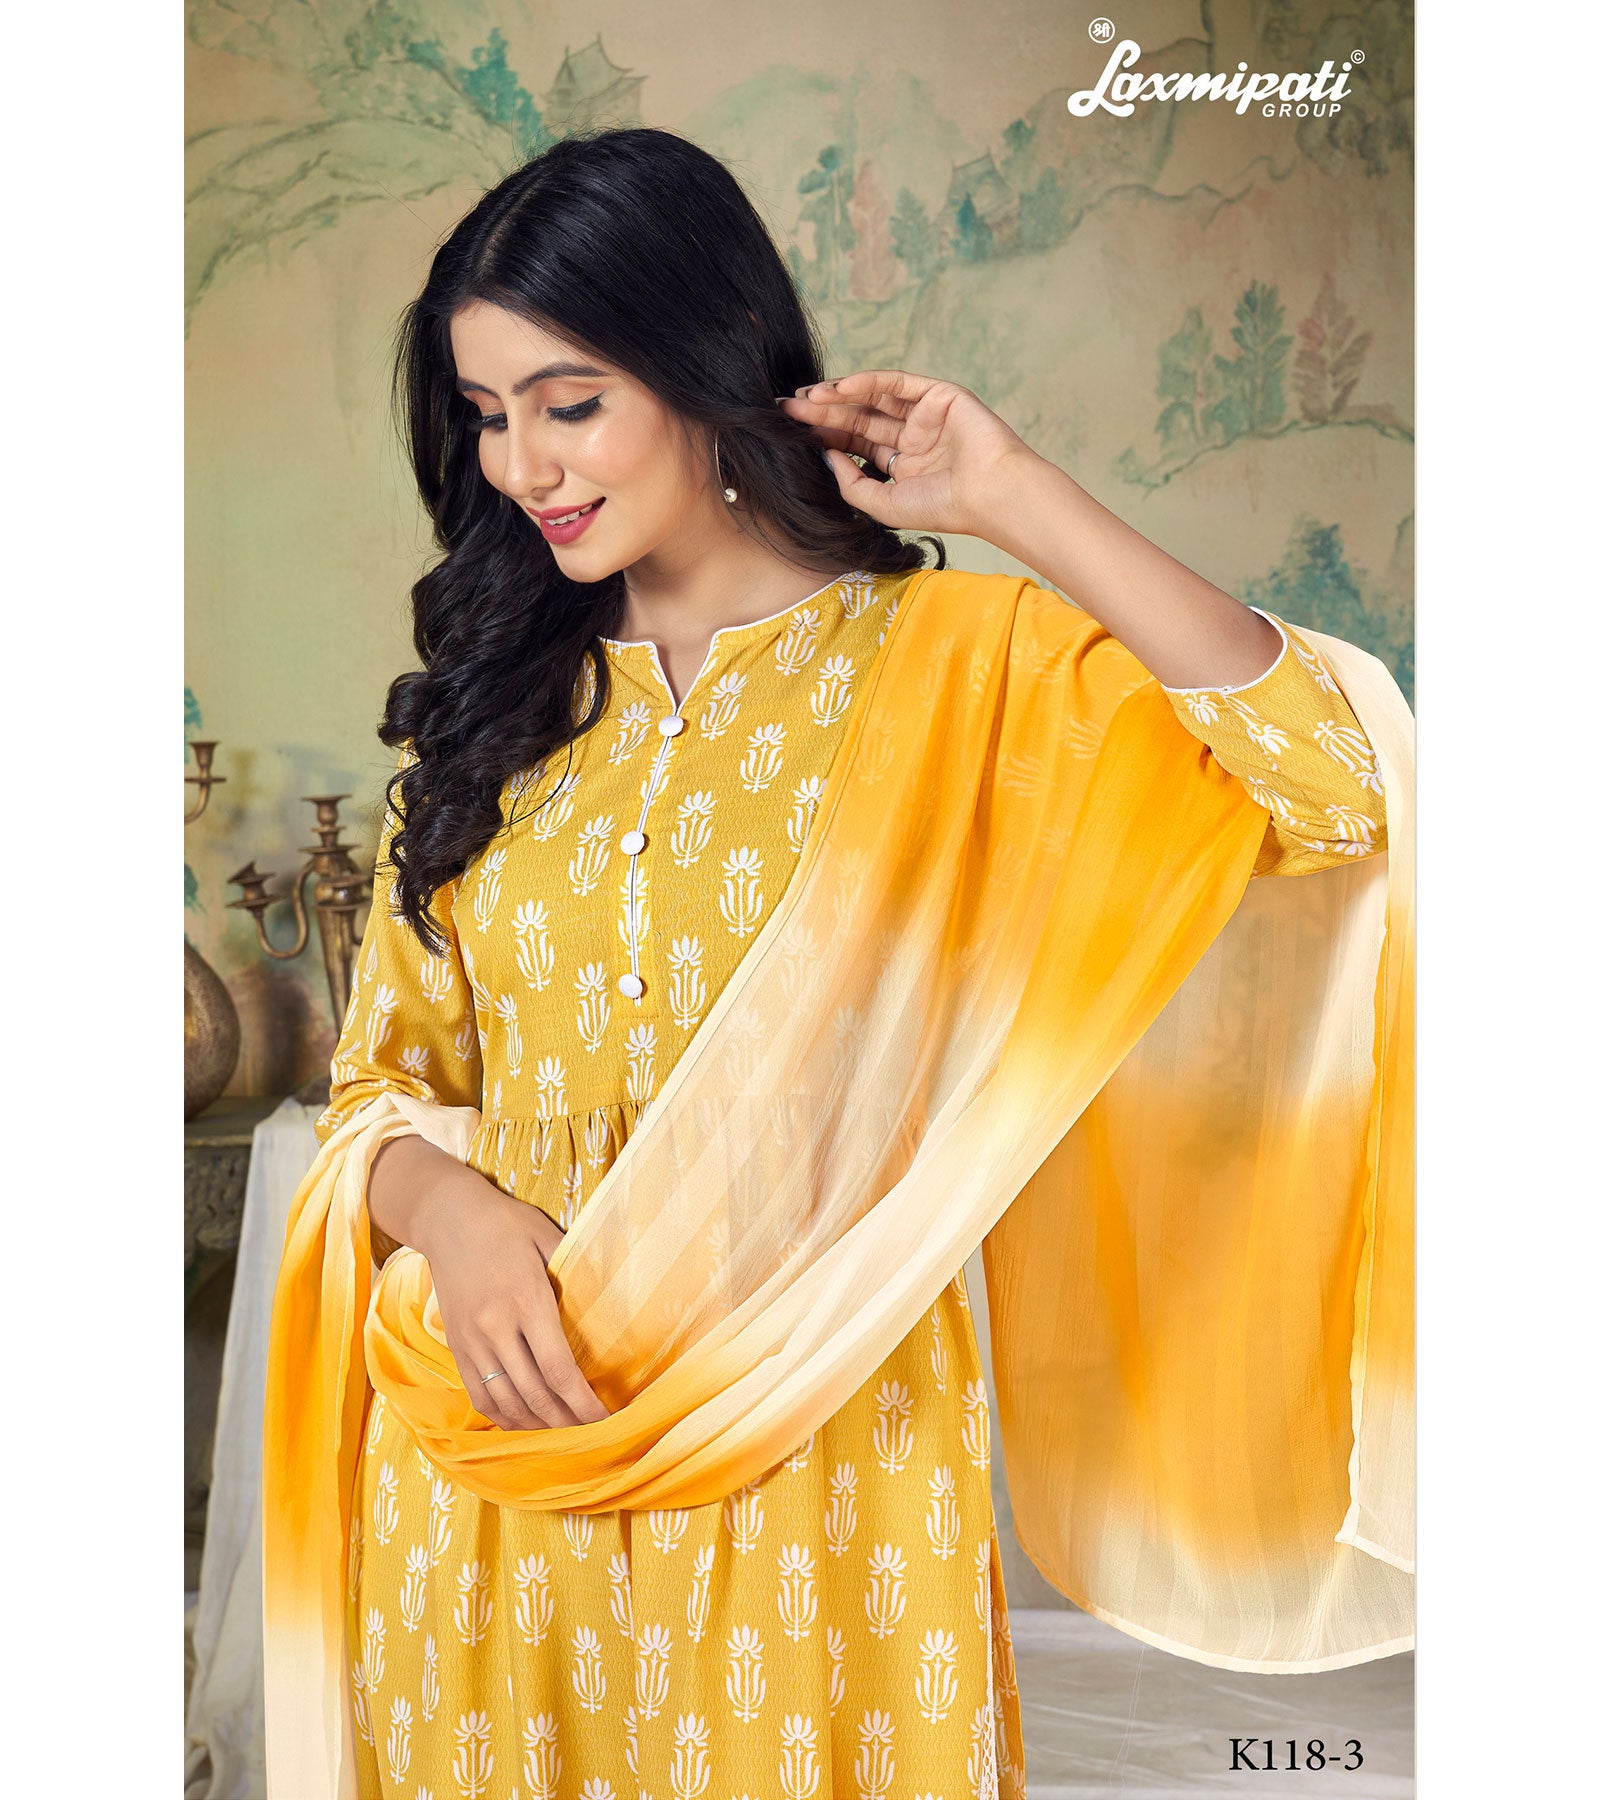 Laxmipati Georgette Printed Saree at Rs.1663/Piece in surat offer by  Laxmipati Sarees